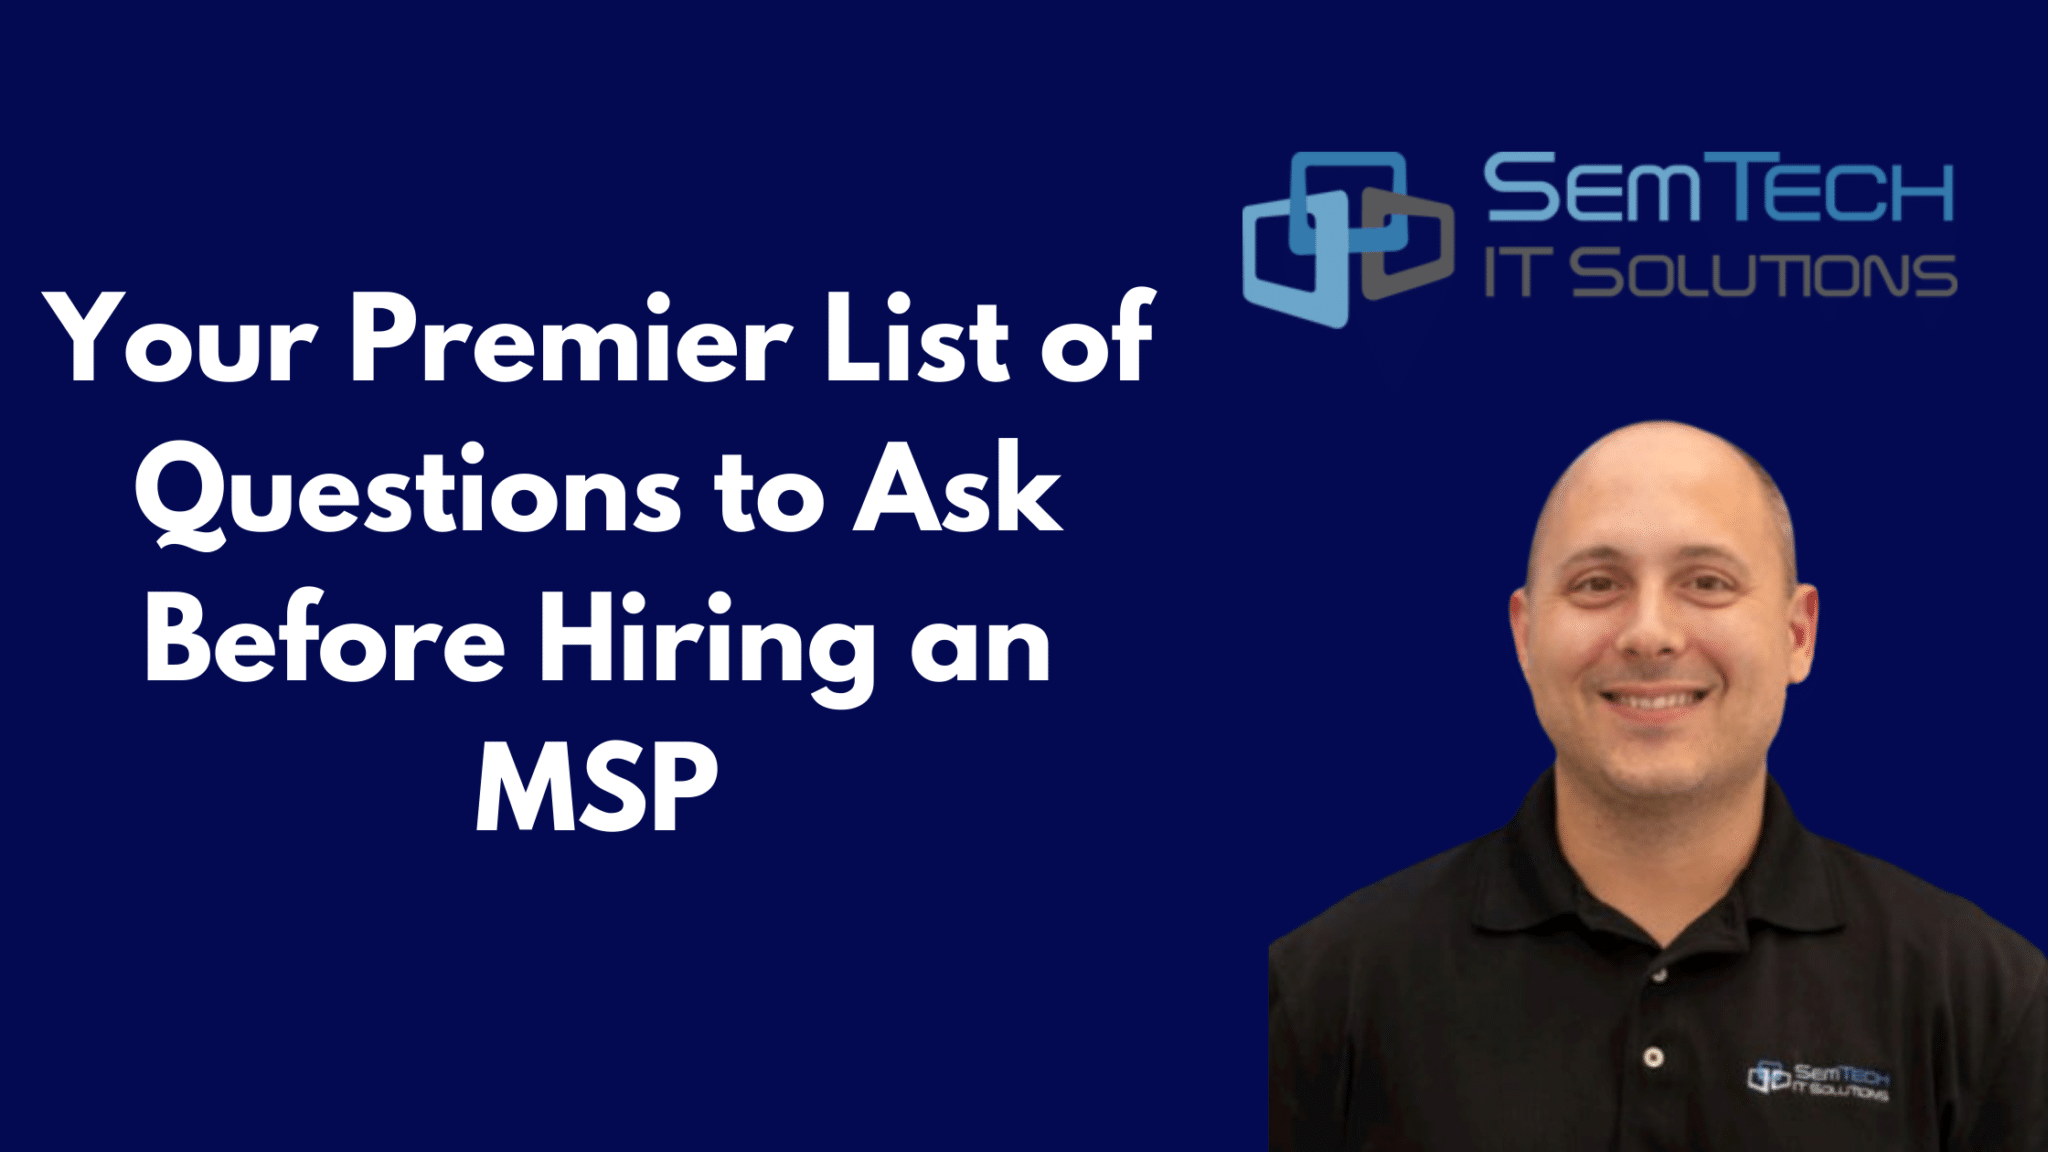 Your Premier List of Questions to Ask Before Hiring an MSP